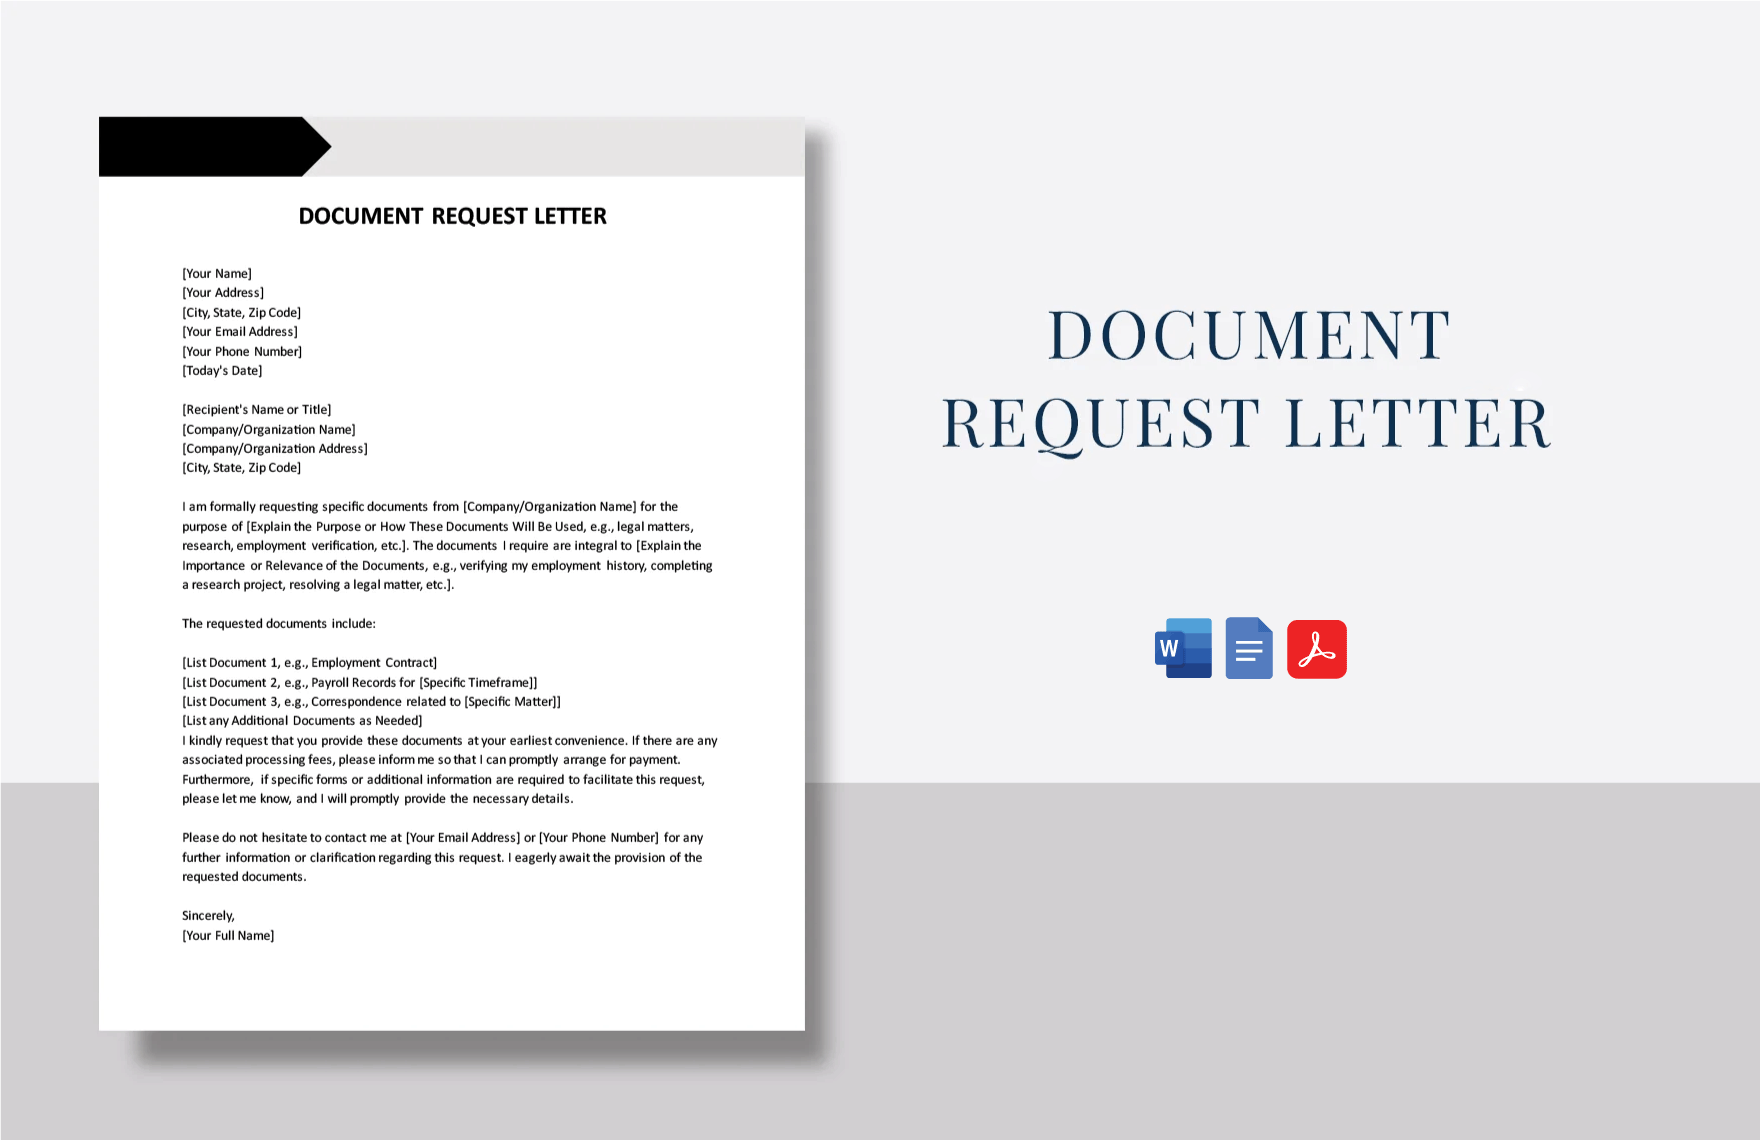 Document Request Letter in Word, Google Docs, PDF